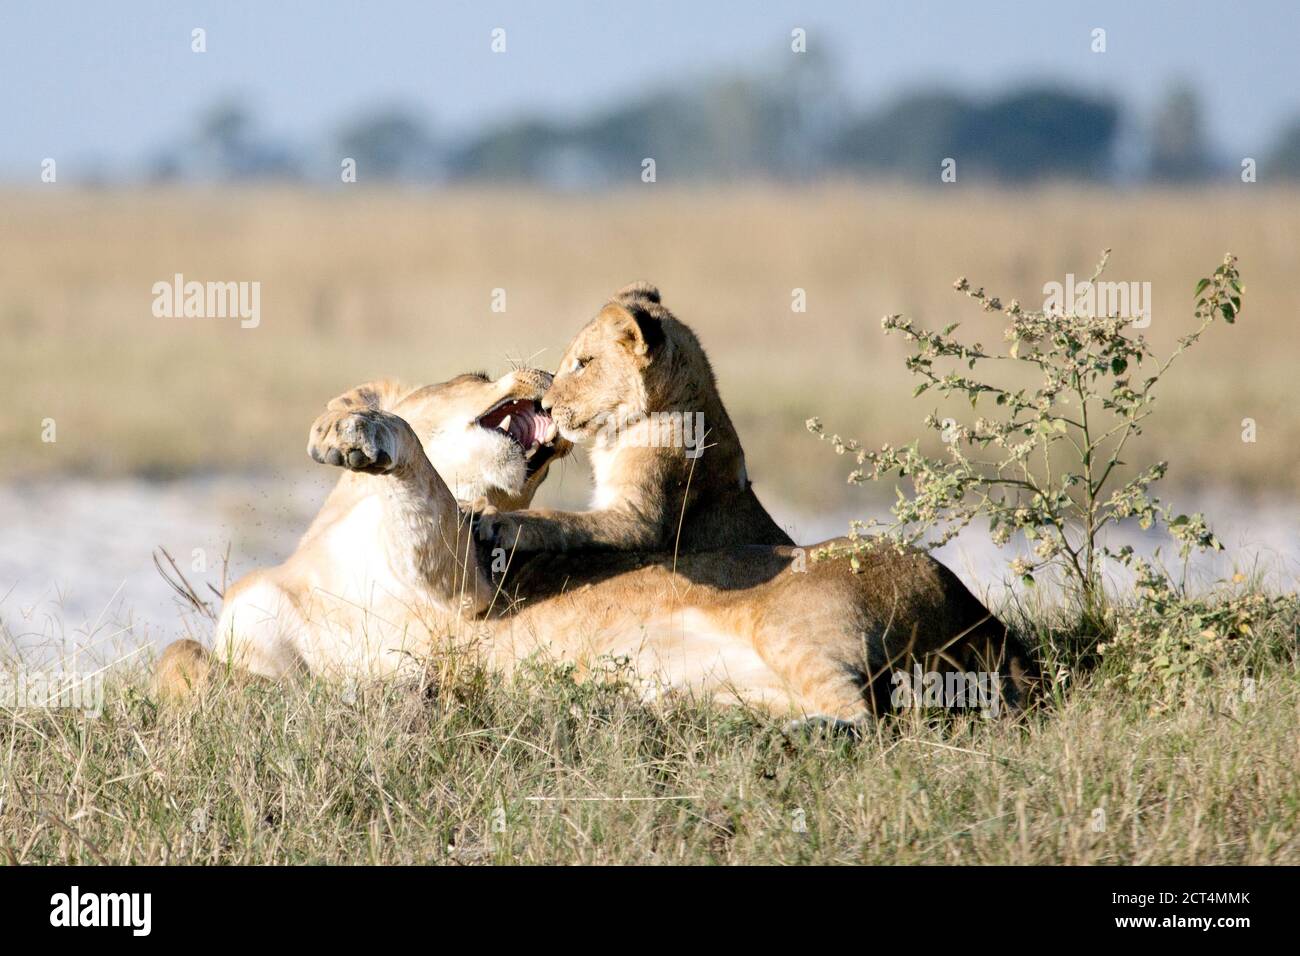 A lioness plays with her cub in the afternoon light. Stock Photo